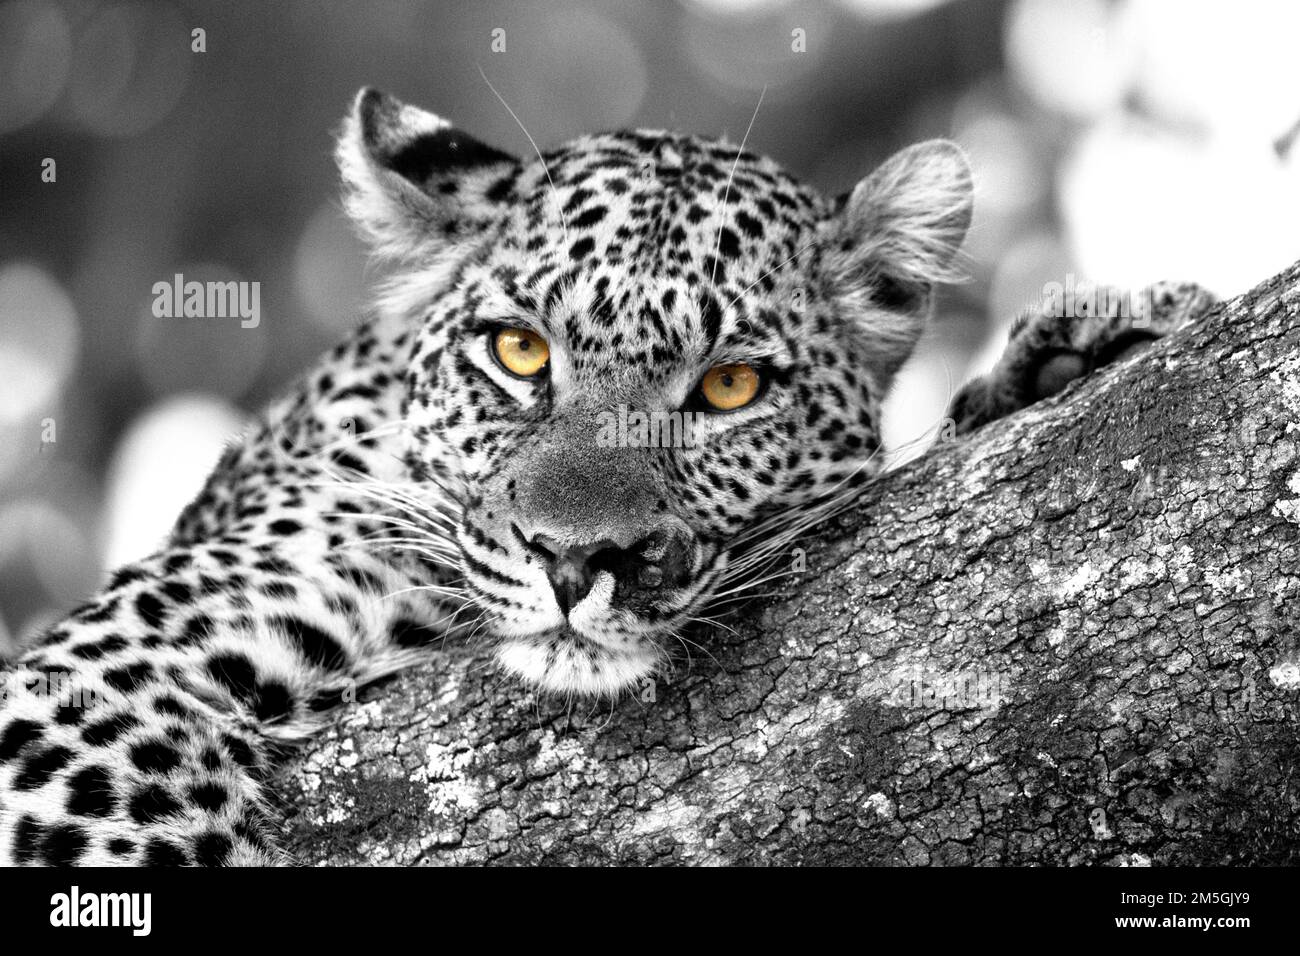 Injured leopard (Panthera pardus) on a tree, looks straight at the camera, black and white apart from the golden eyes, Botswana Stock Photo